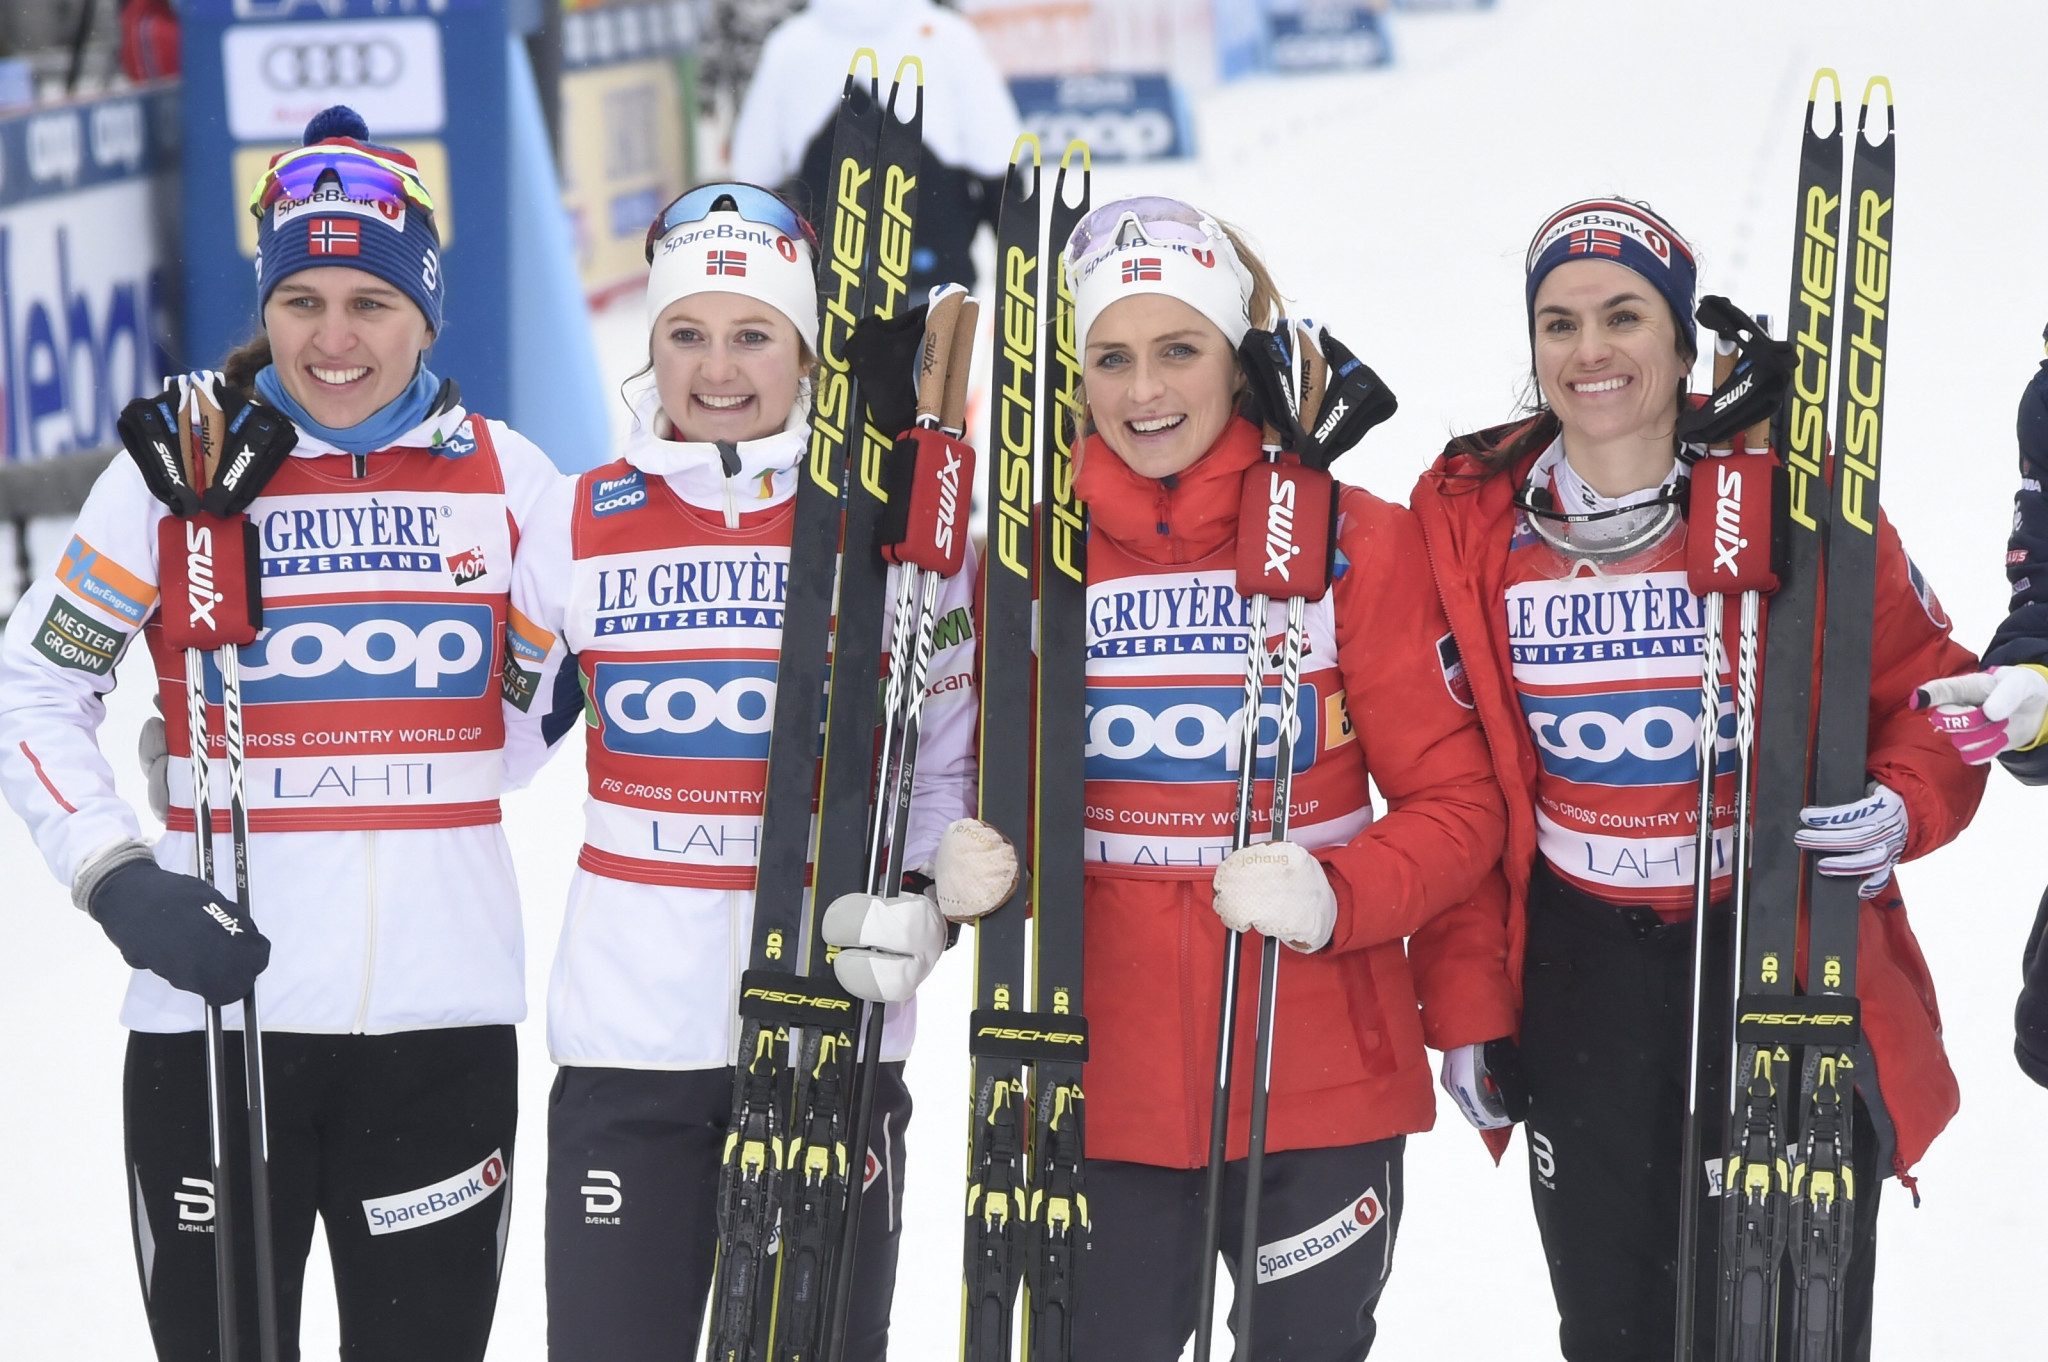 Norway win team relay events at FIS Cross-Country World Cup in Lahti